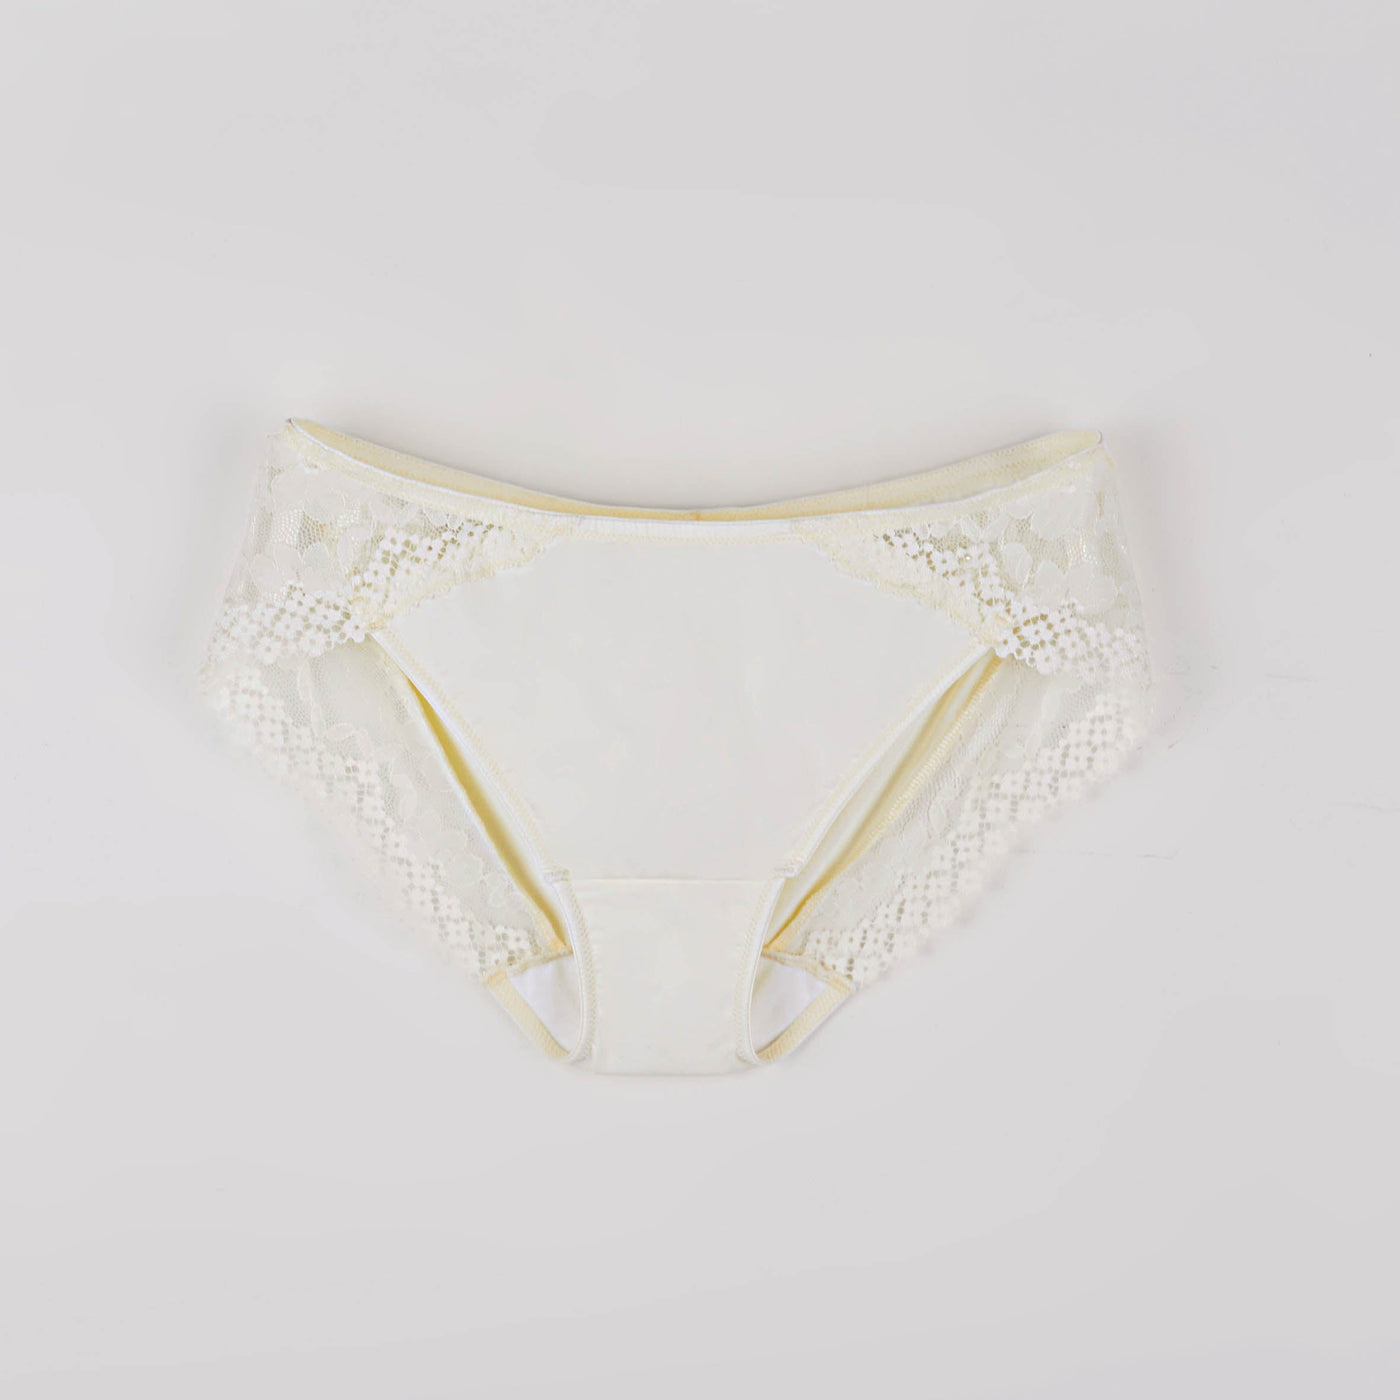 Match Back Cooling Lace Bikini Panty Panty Her Own Words Transparent Yellow S 